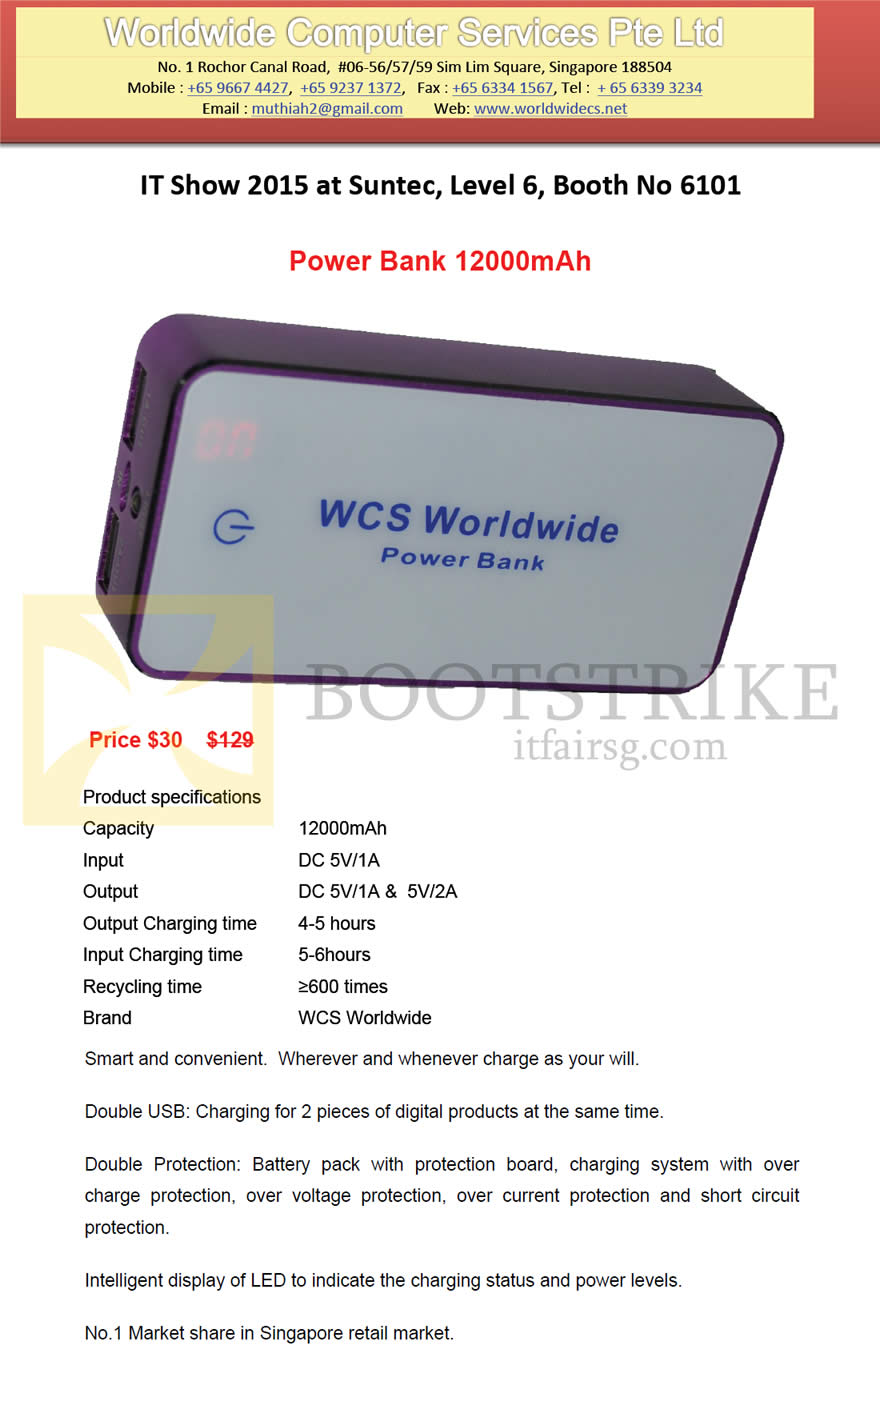 IT SHOW 2015 price list image brochure of Worldwide Computer Services Power Bank 12000mah